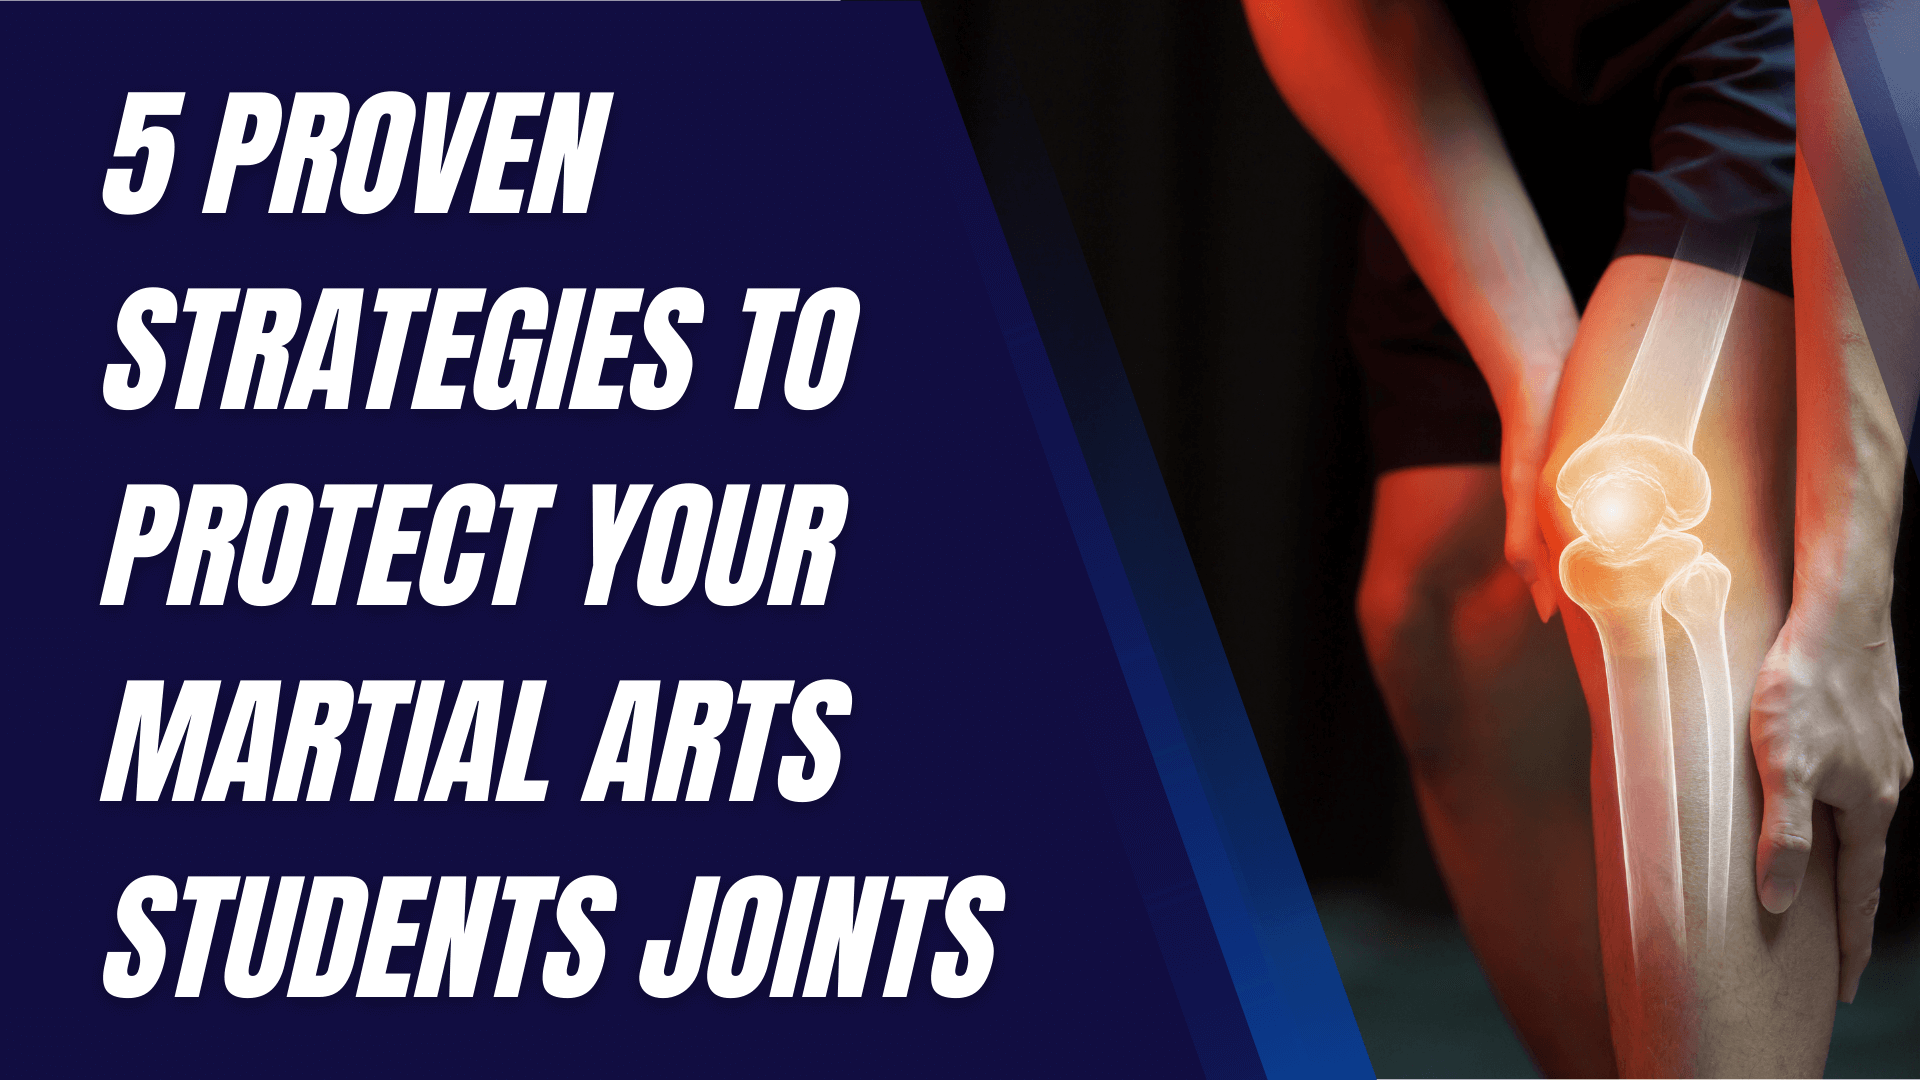 5 Proven Strategies to Protect Your Martial Arts Students Joints